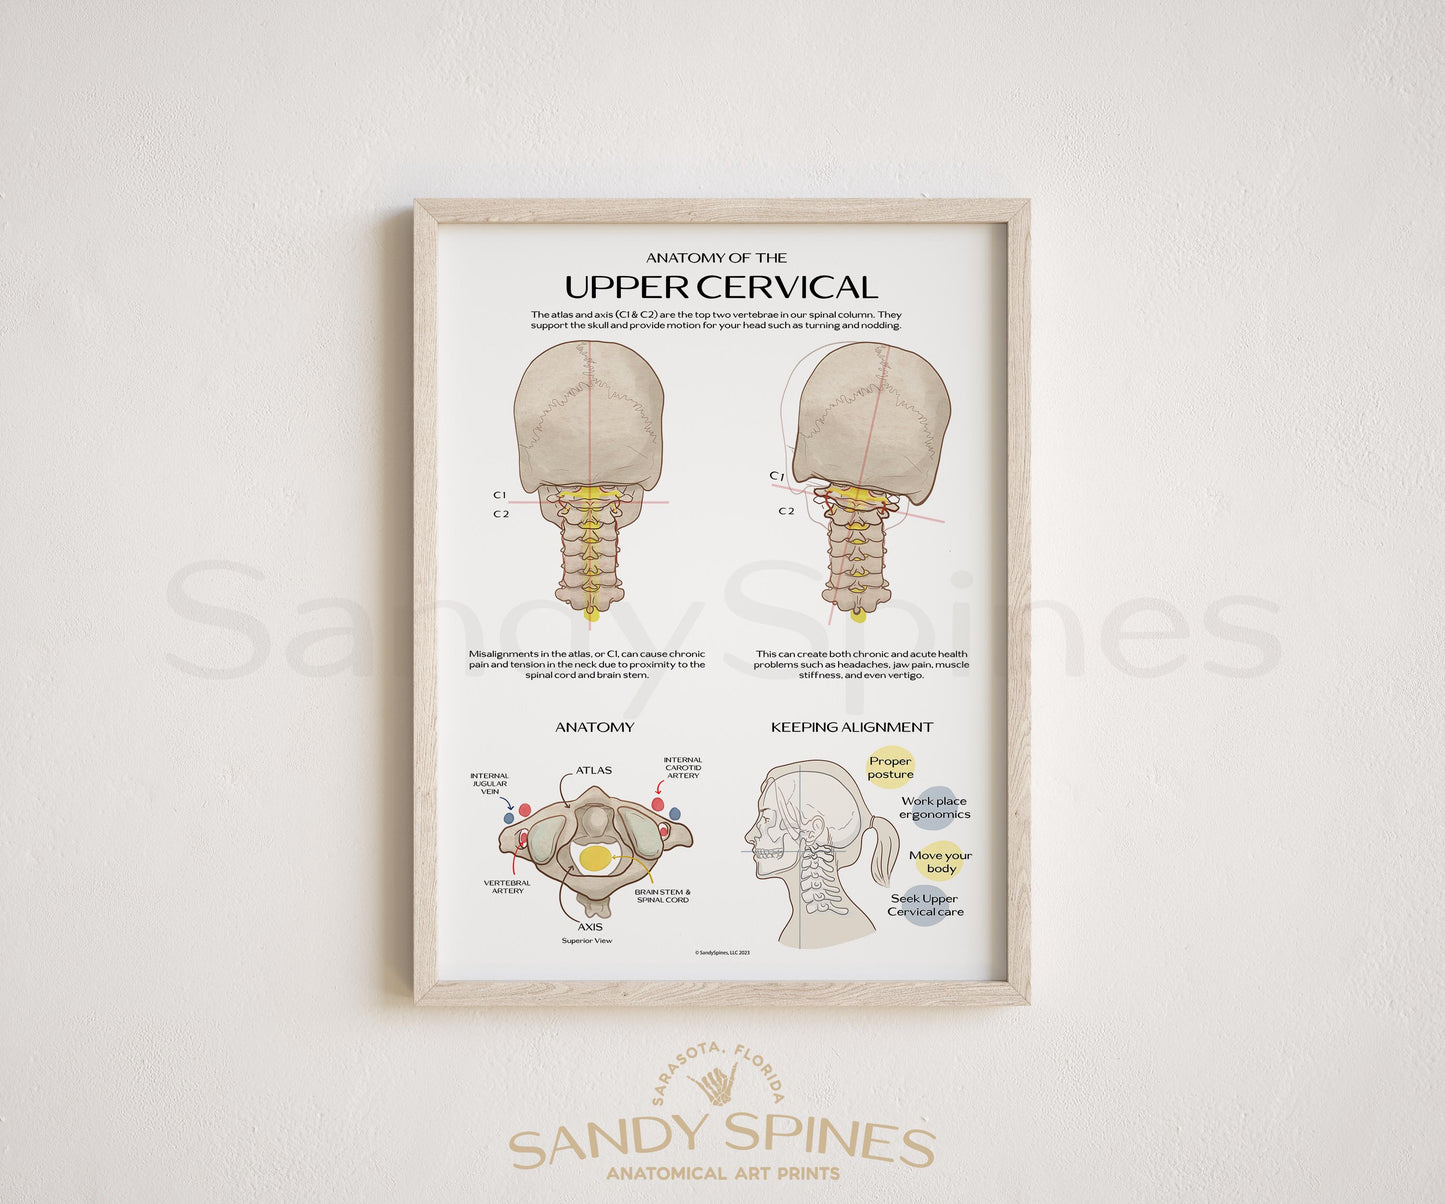 Anatomy of the Upper Cervical Poster